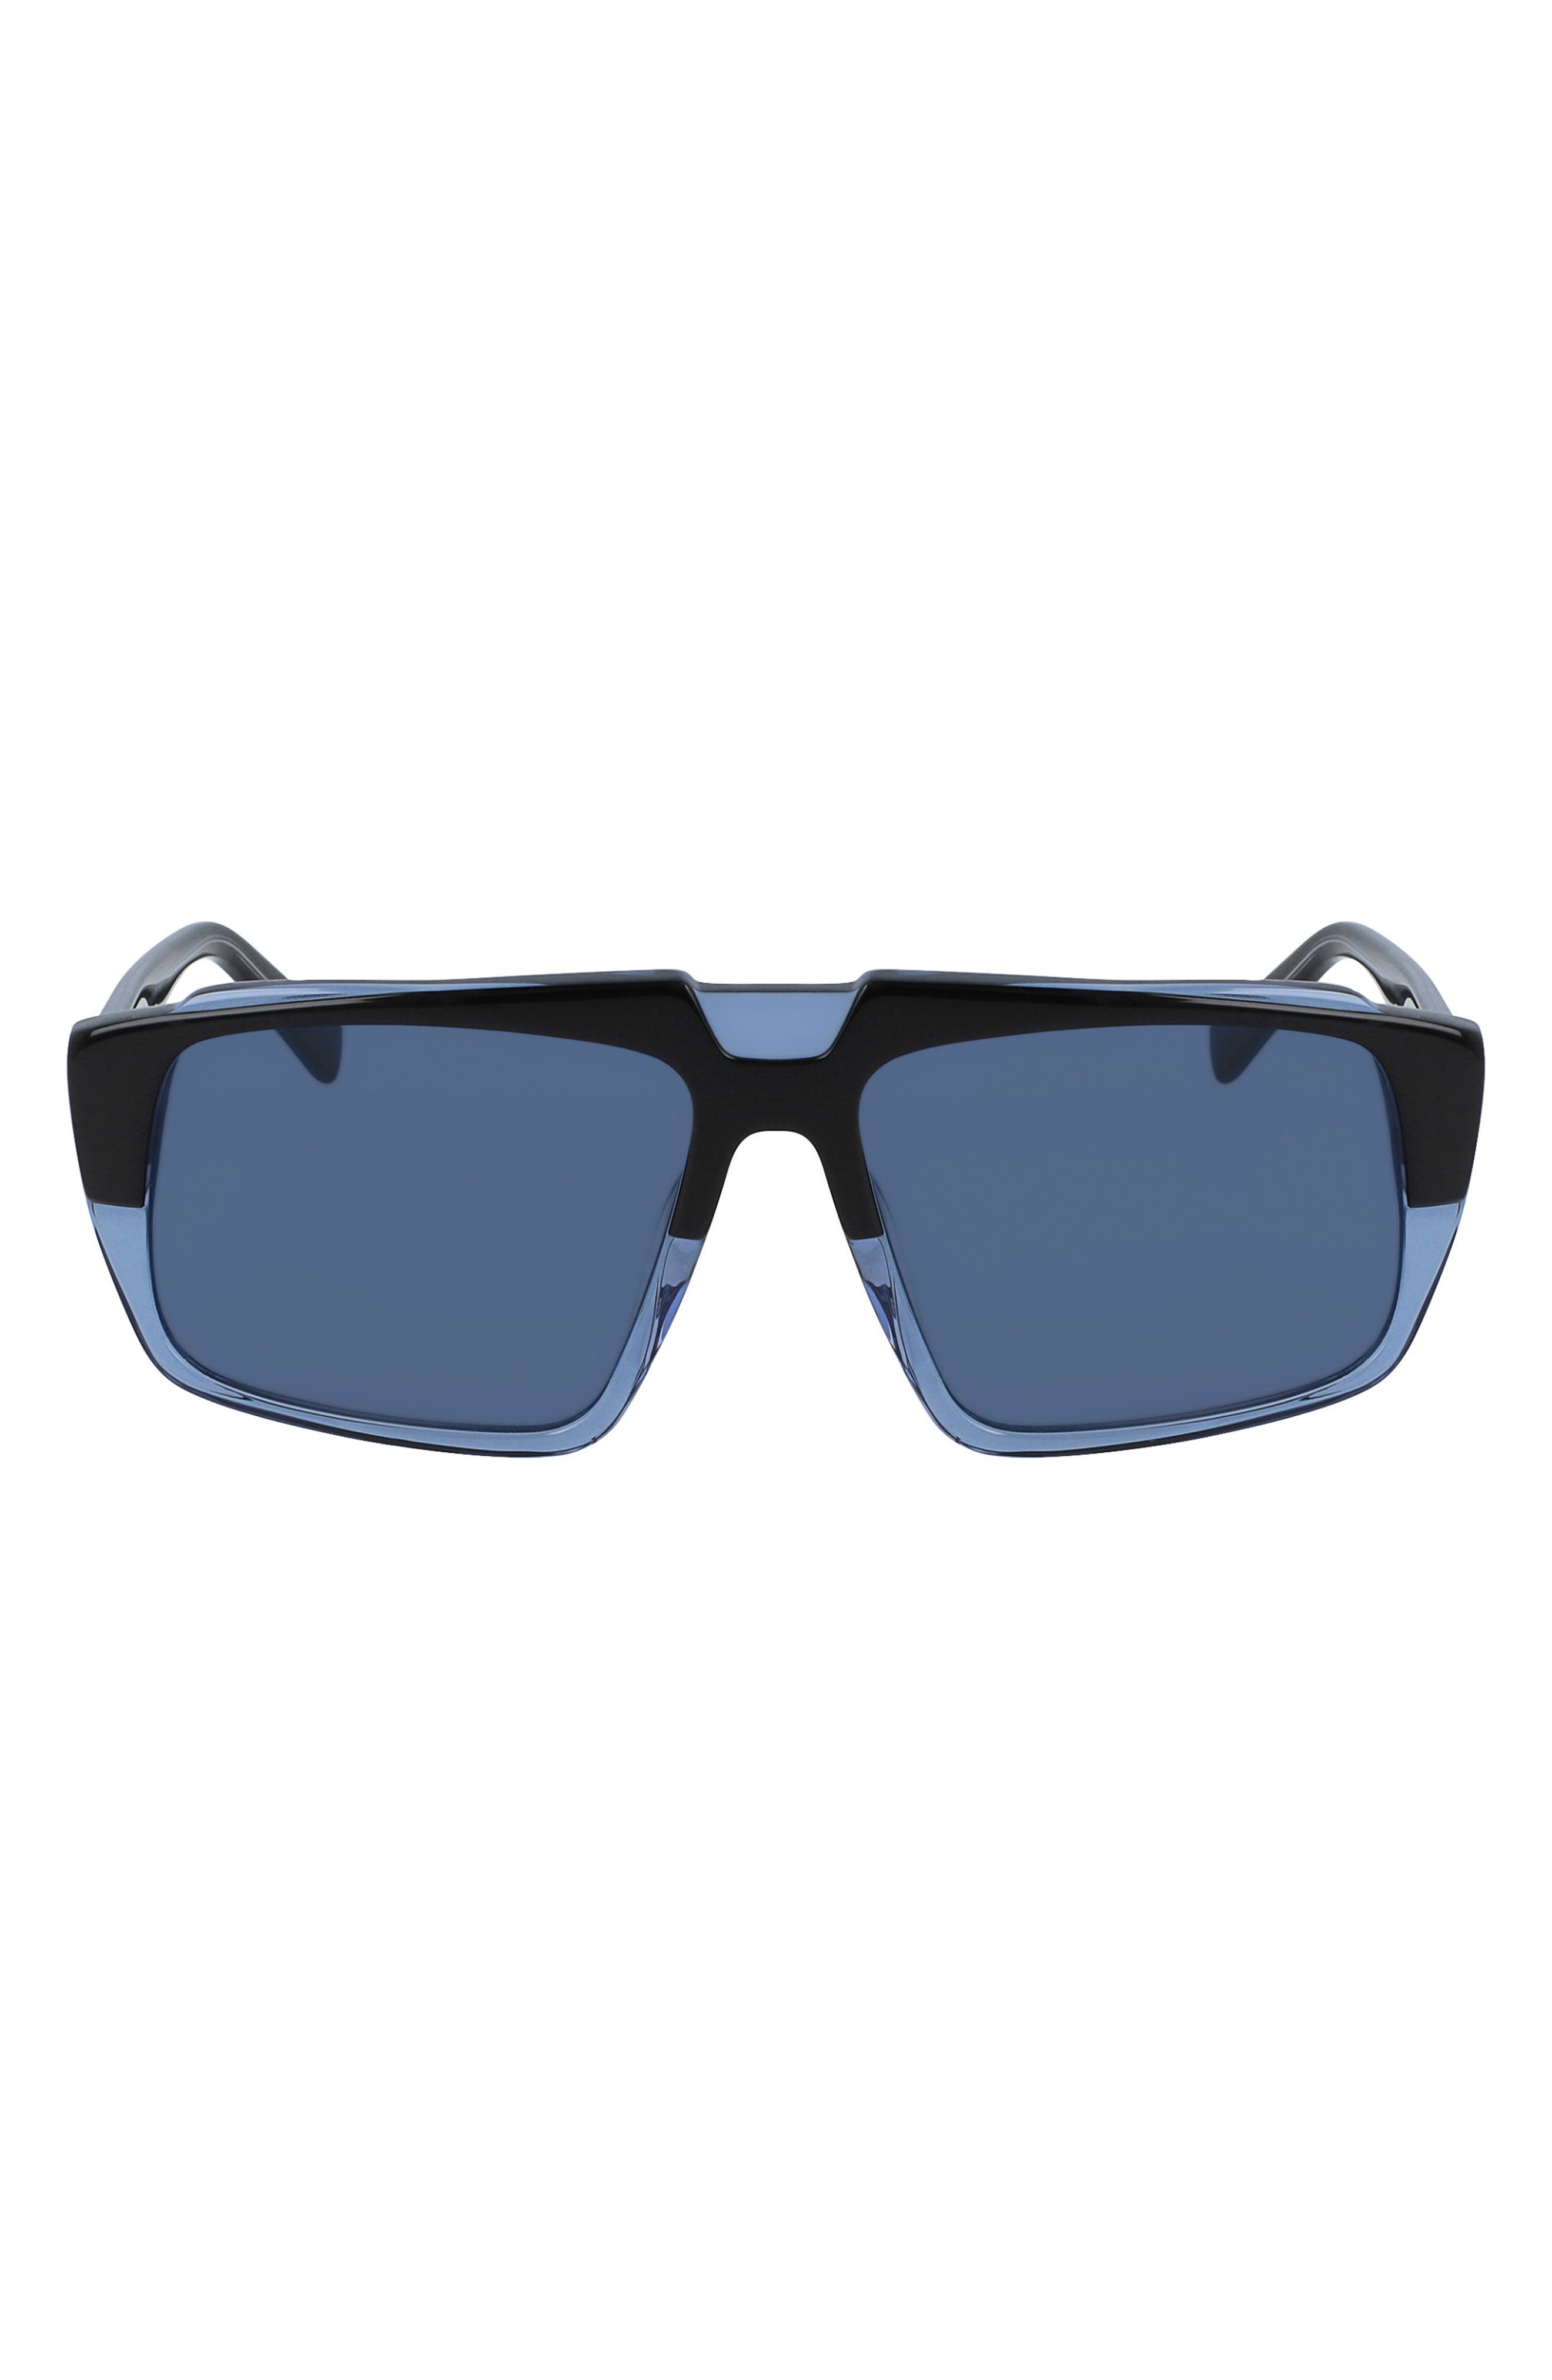 MCM 57mm Layered Rectangle Sunglasses in Blue Azure/Blue at Nordstrom